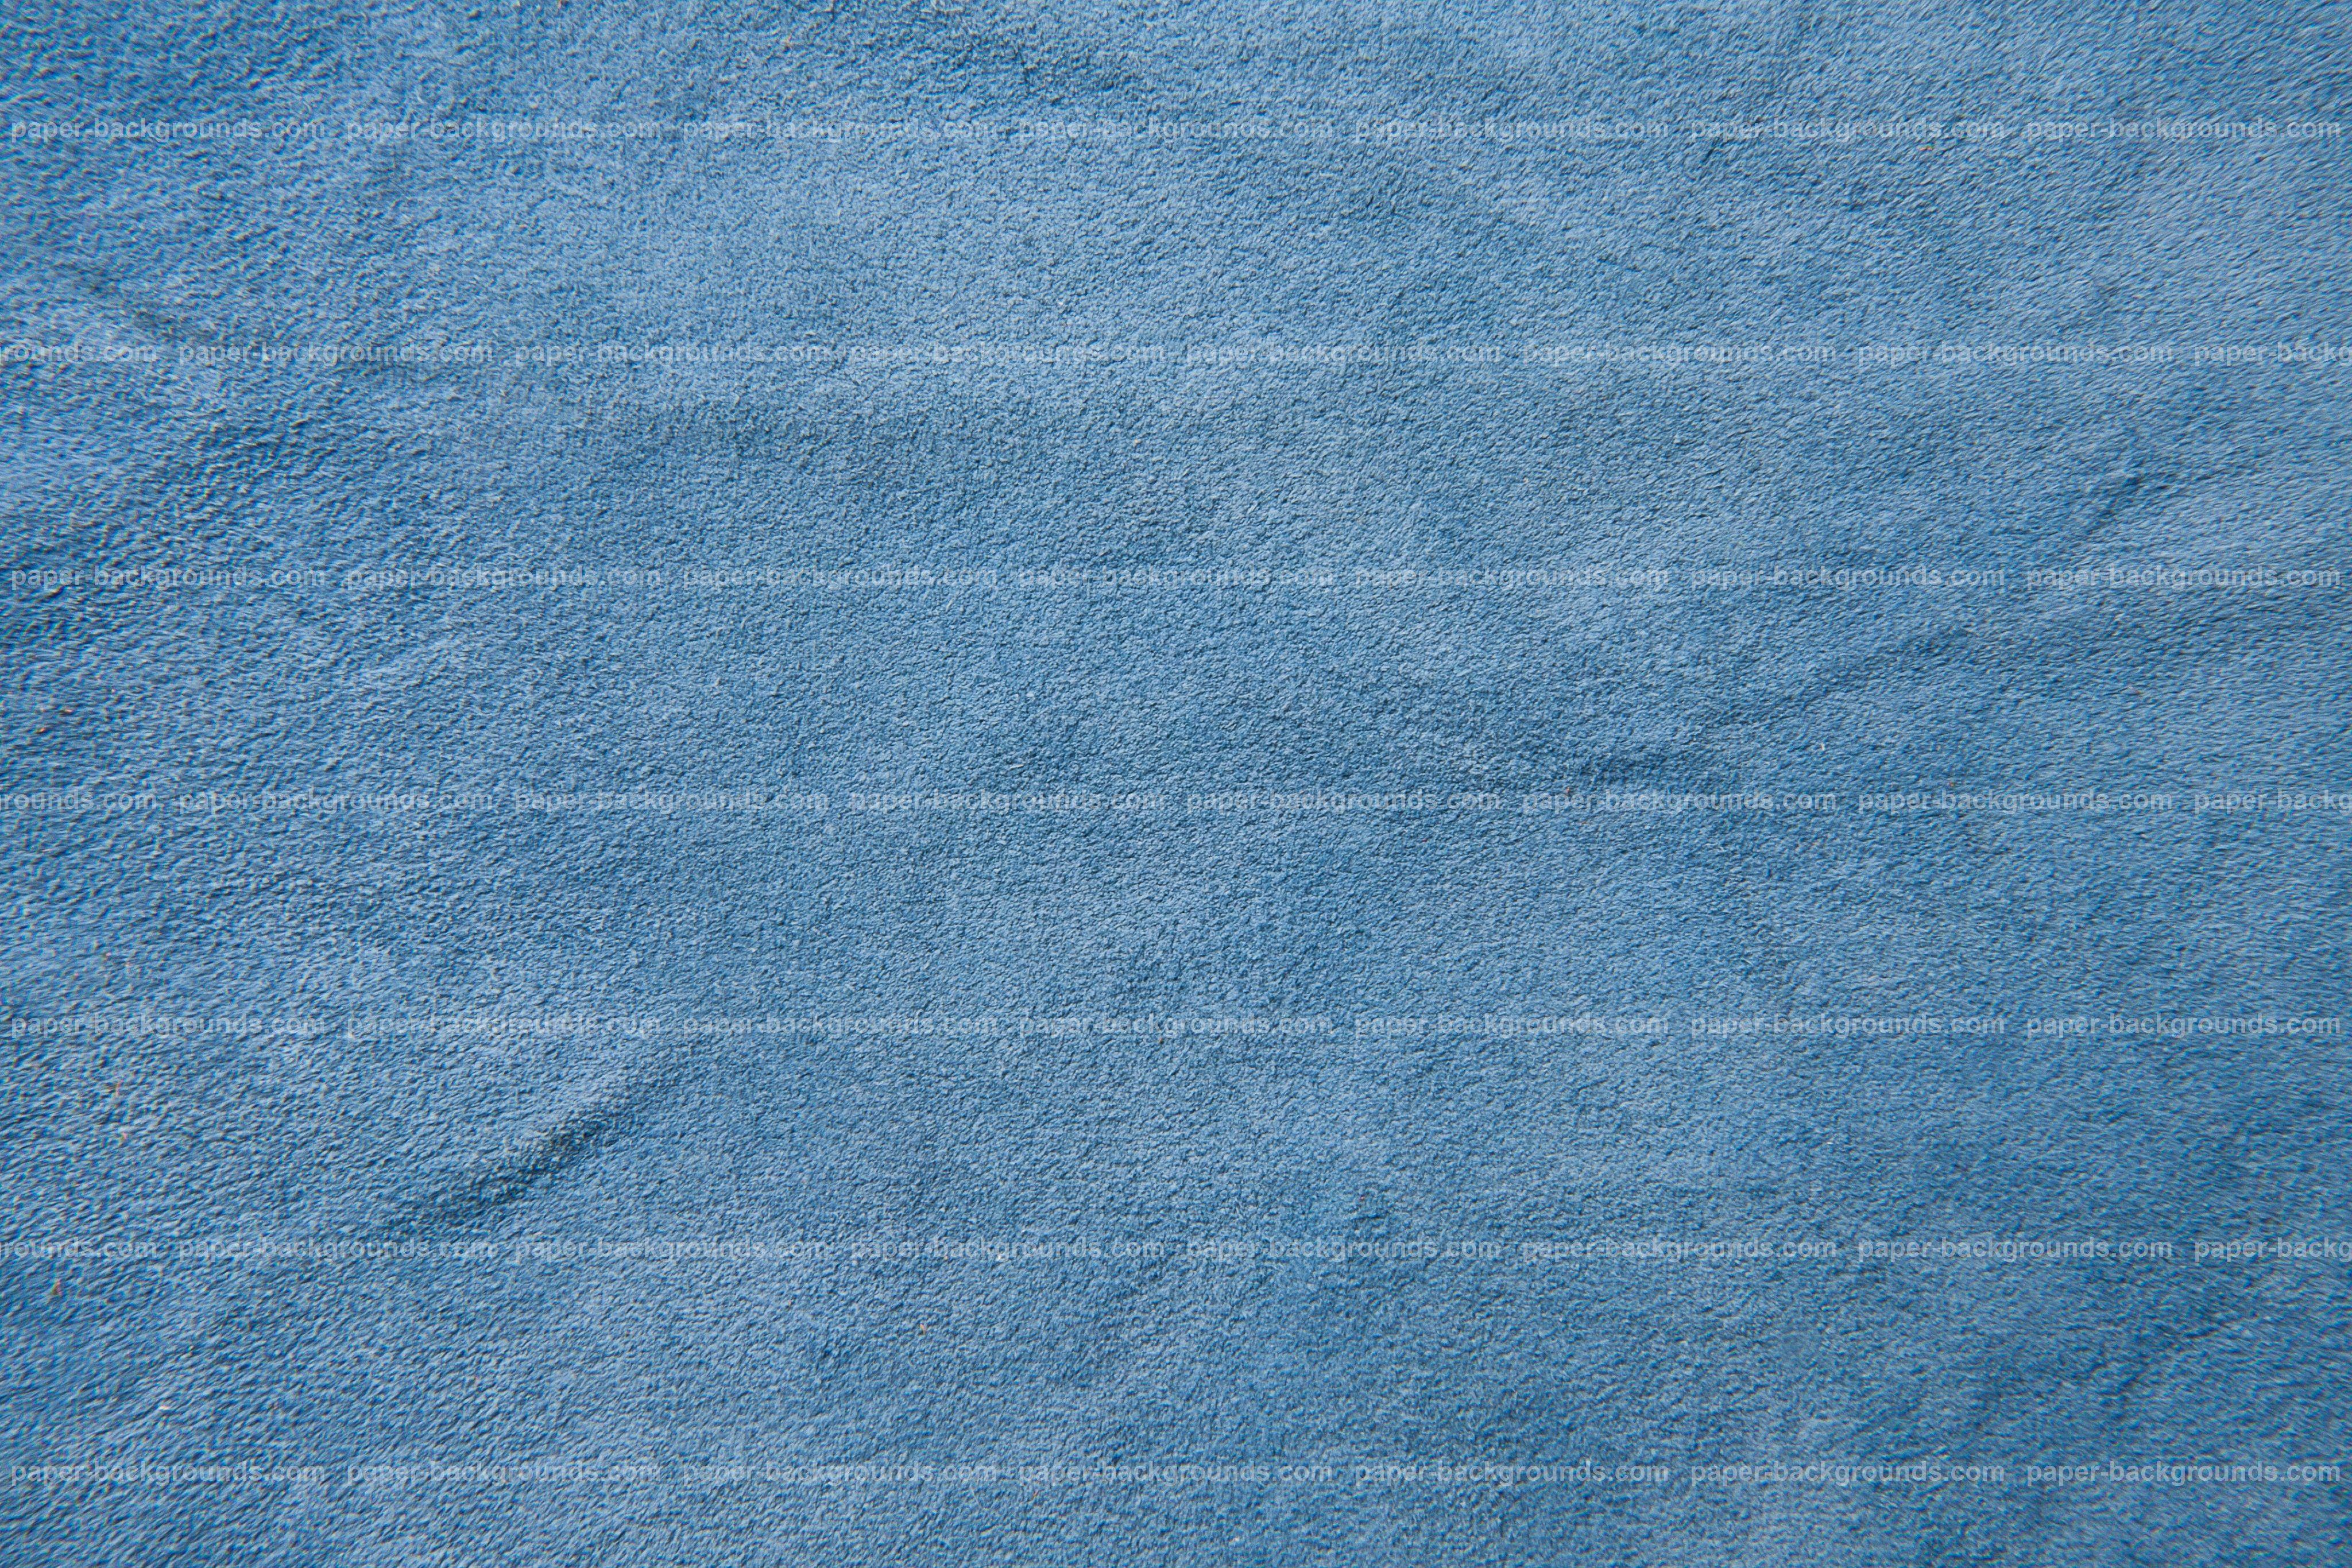 Paper Background. Blue Soft Leather Texture Background High Resolution